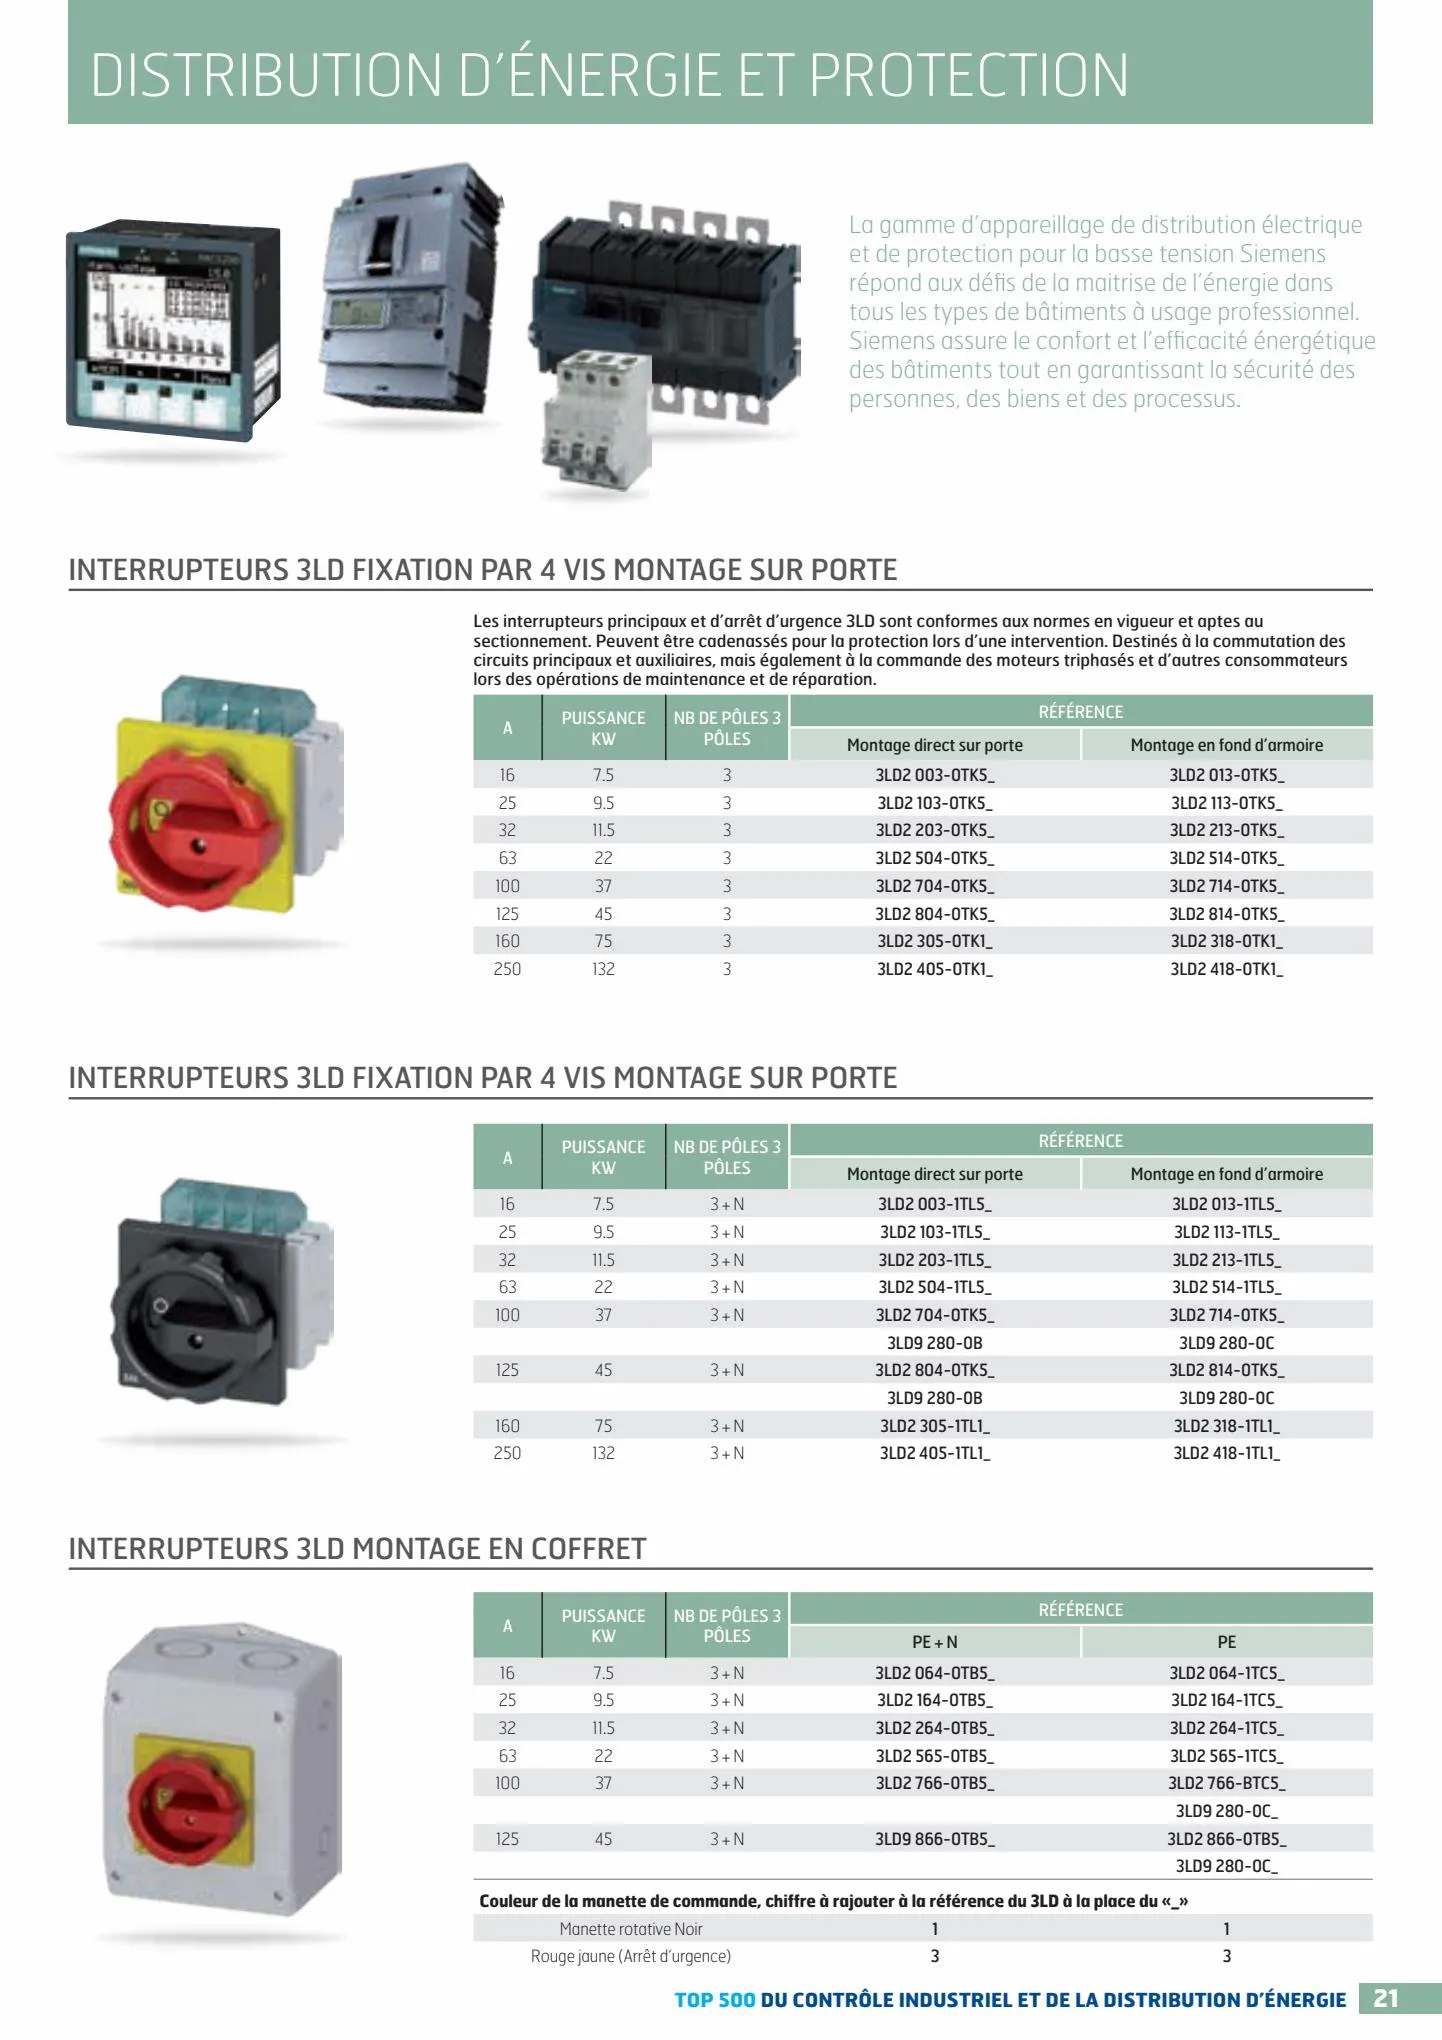 Catalogue TOP 500 siemens, page 00021